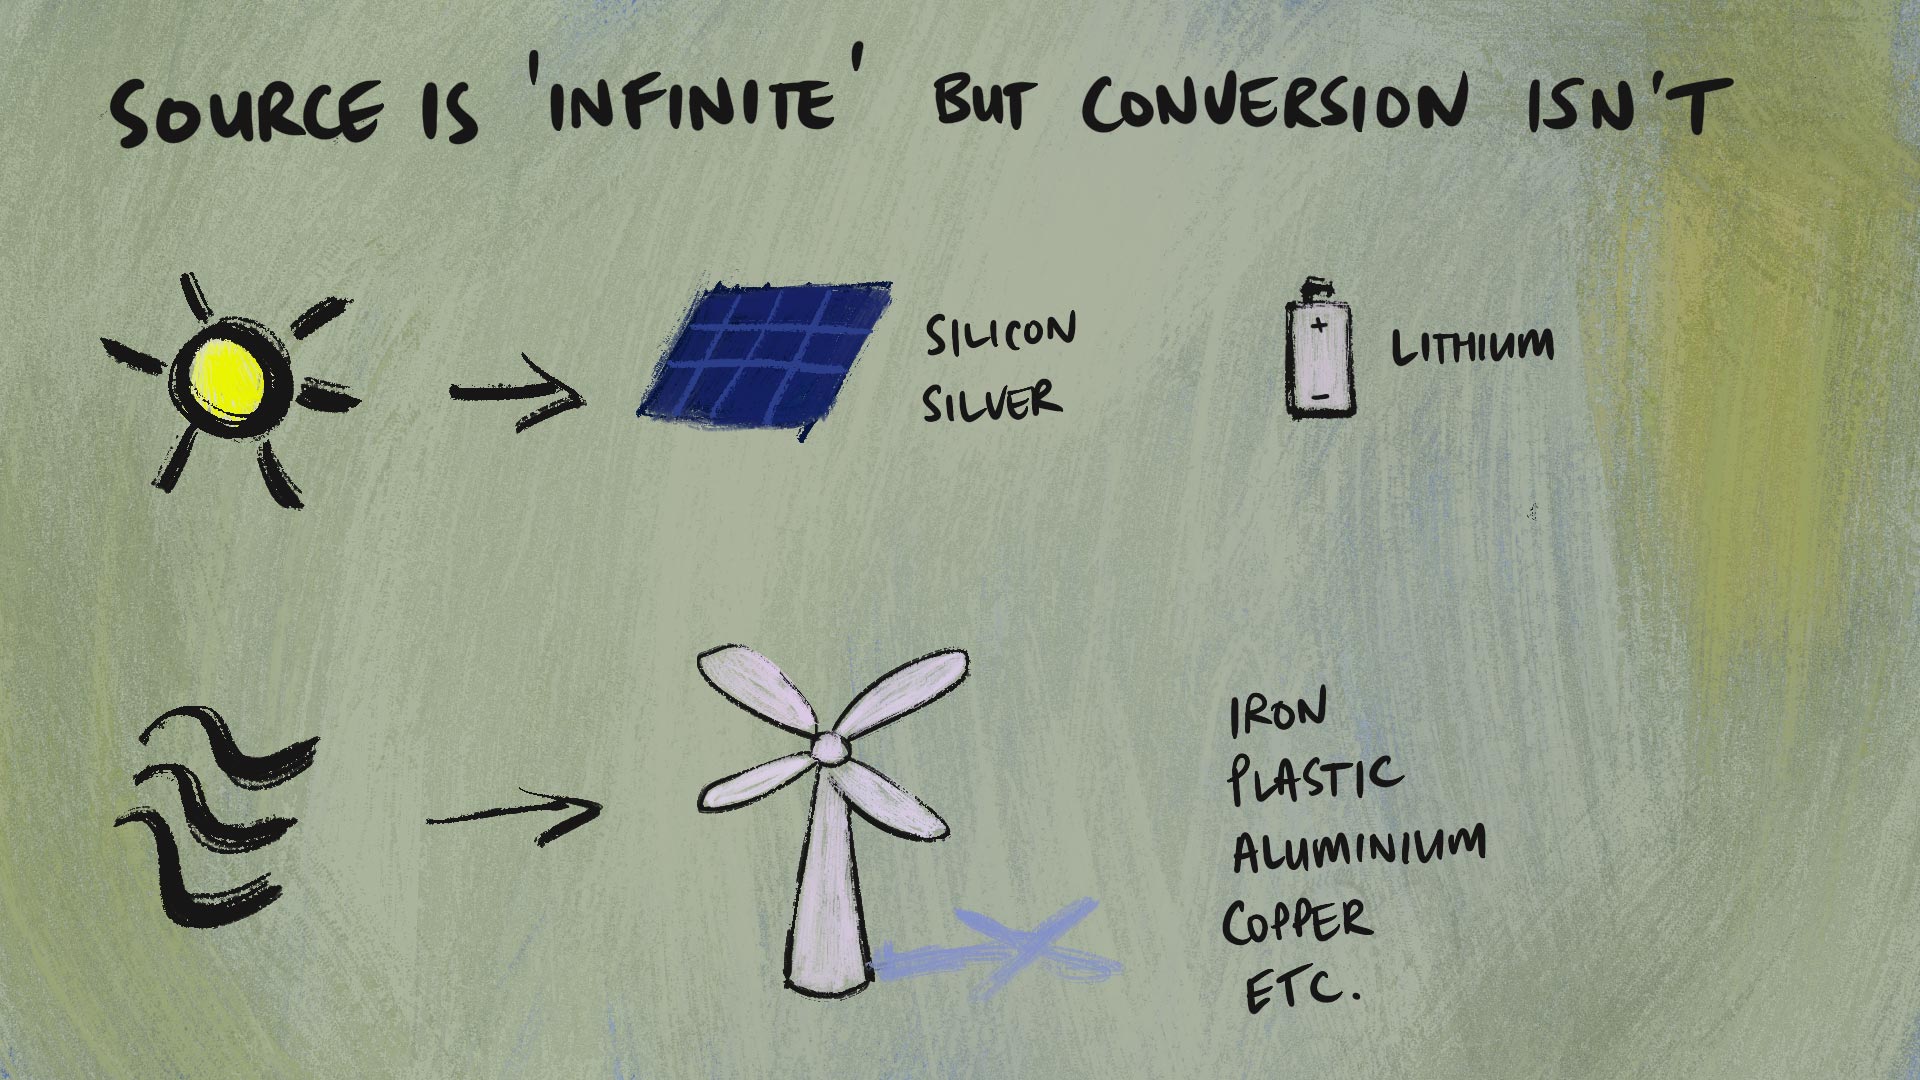 A diagram showing the sun and wind energy, the ways we convert it (solar panels and wind turbines) and the materials we use to facilitate conversion